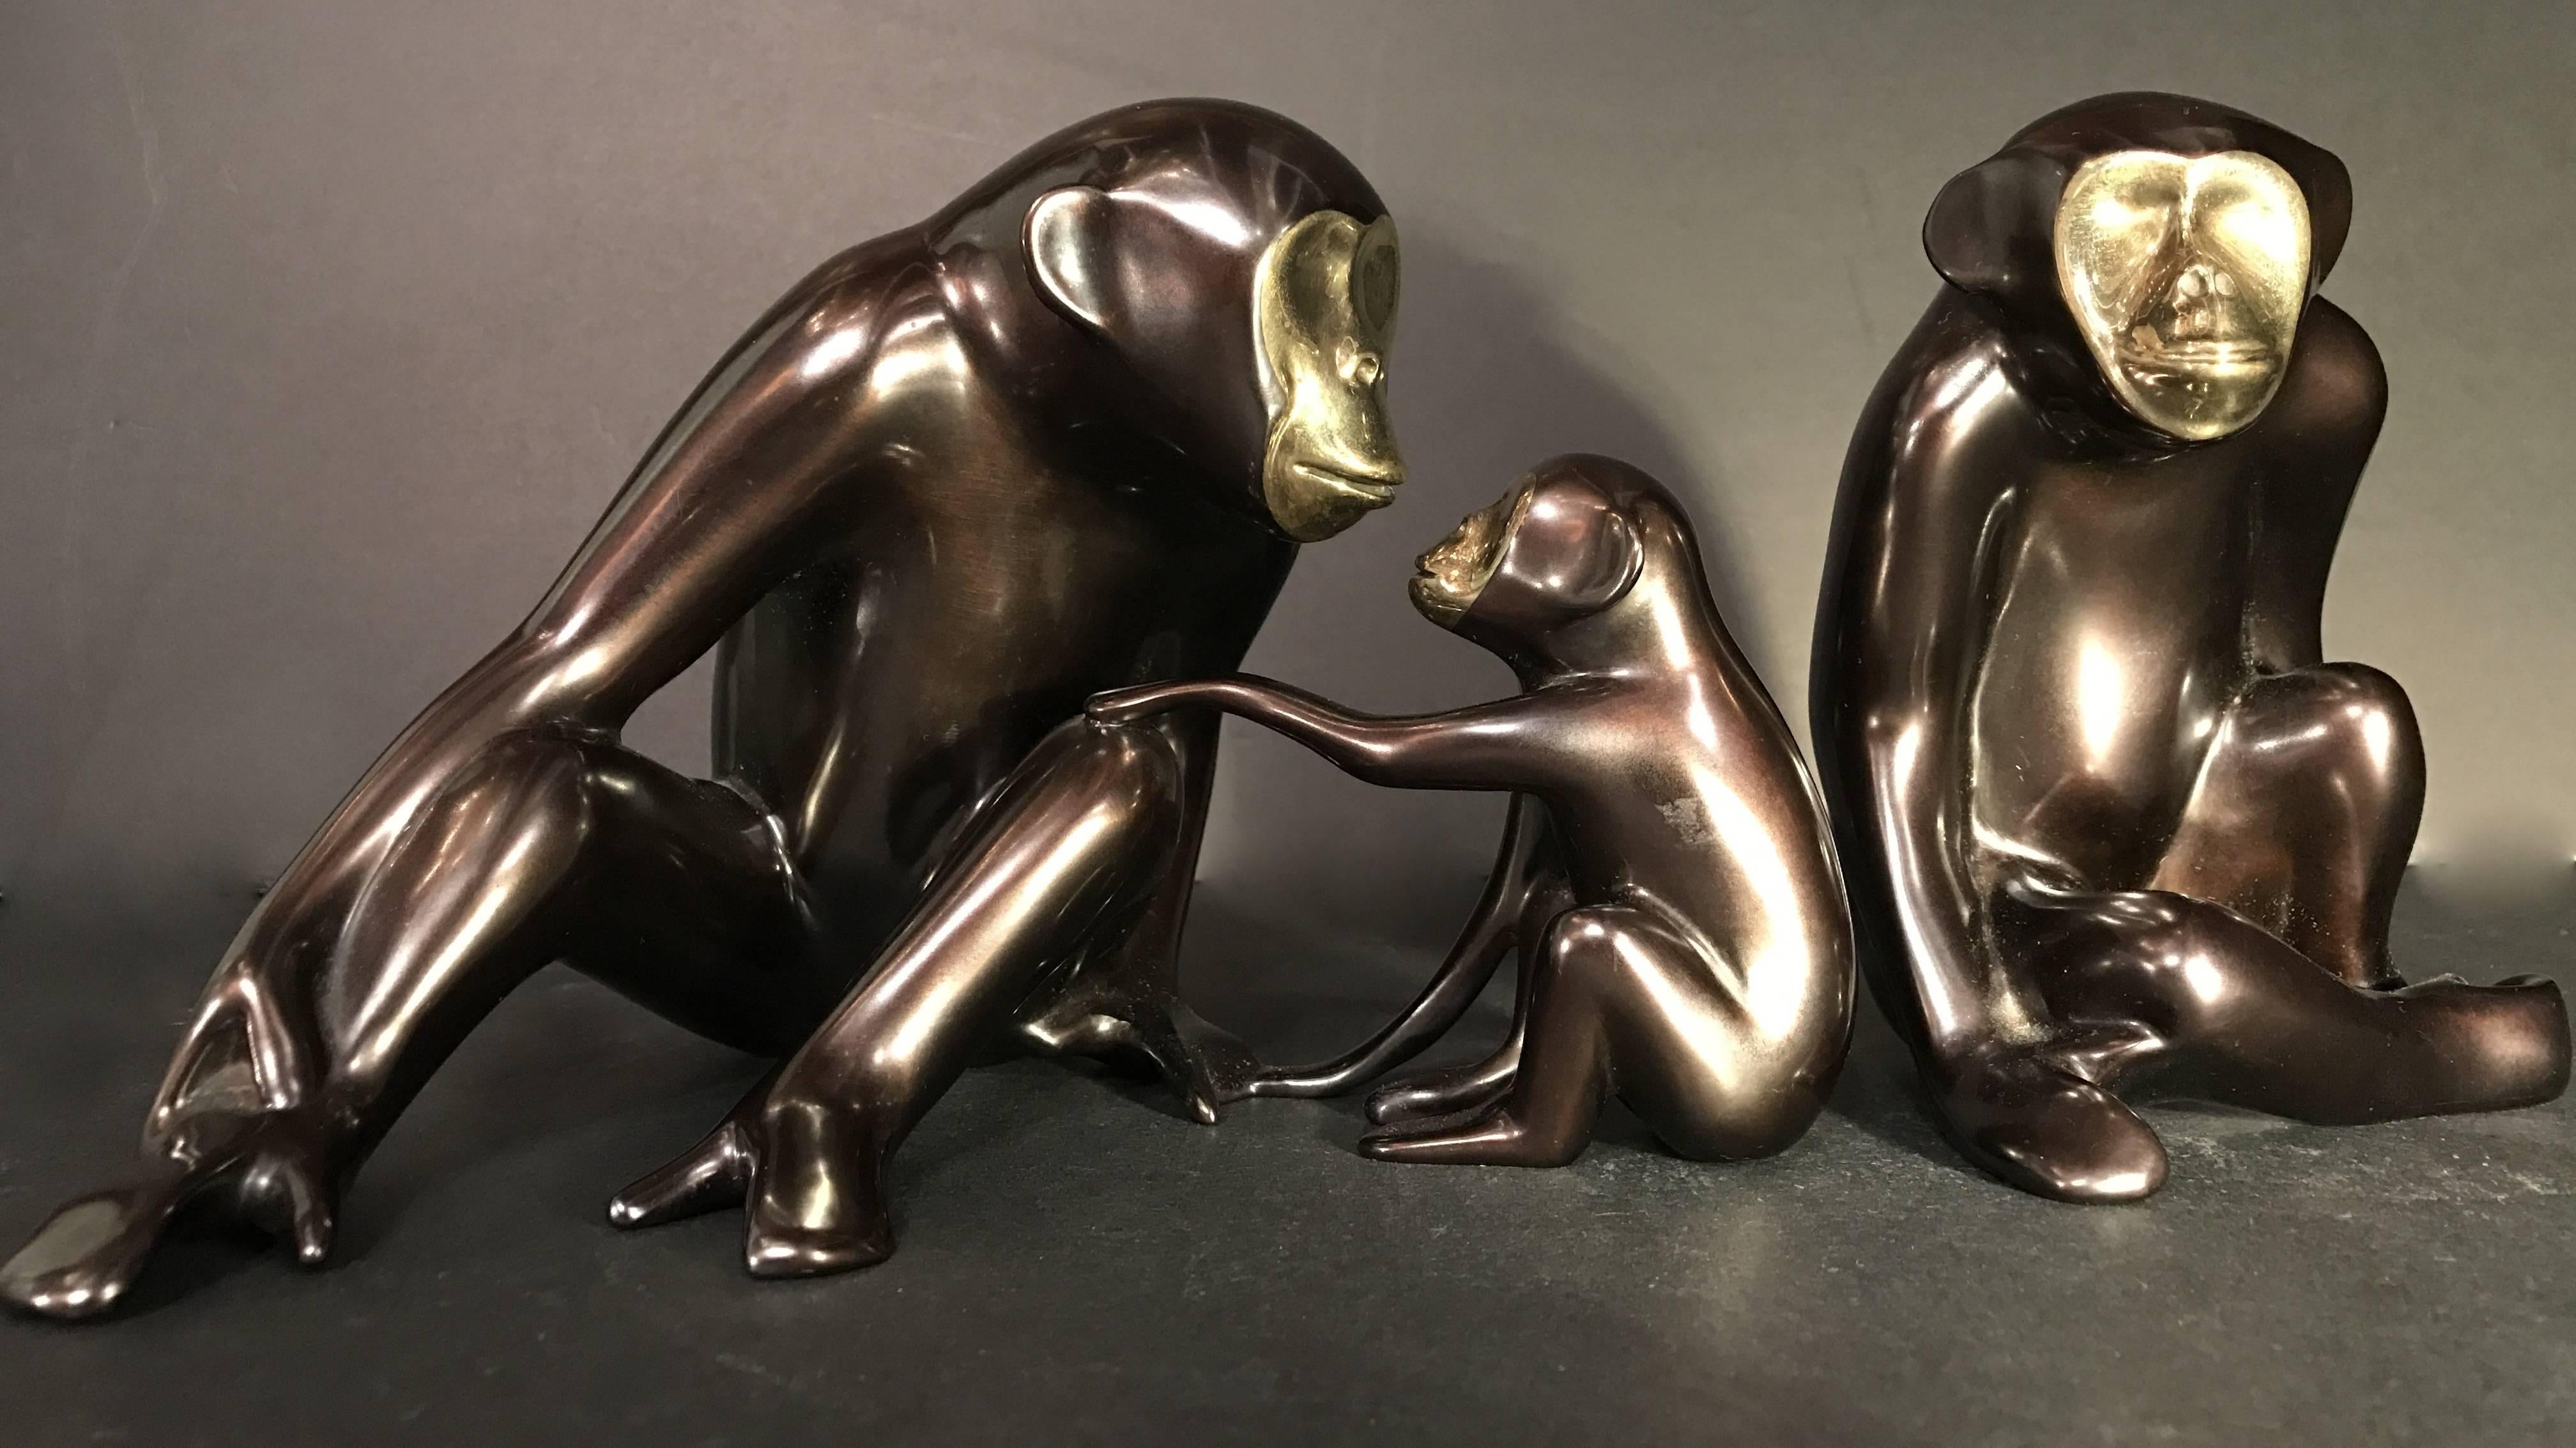 Mid-Century bronze chimpanzee family with polished faces and aubergine Patina by Loet Vanderveen, Dutch, 1921-2015. Limited Edition Pieces, Numbered and Signed.
Measurements:
Pair: 5.5 inches tall x 8 inches wide Numbered: 535/750
Single: 5.5